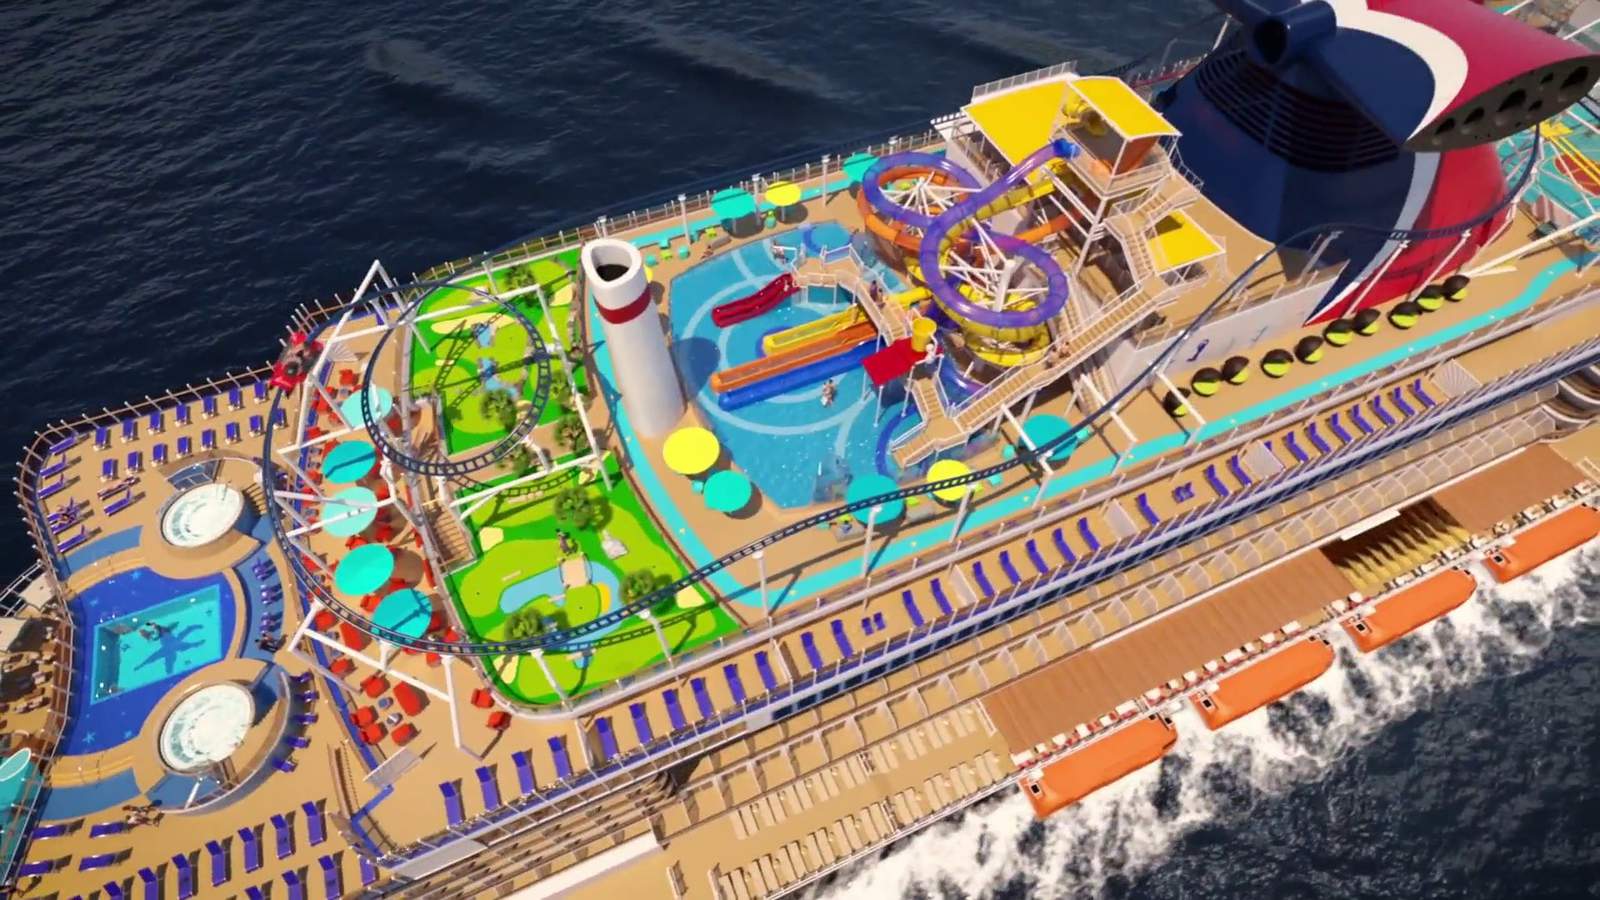 This is what the first roller coaster at sea will look like